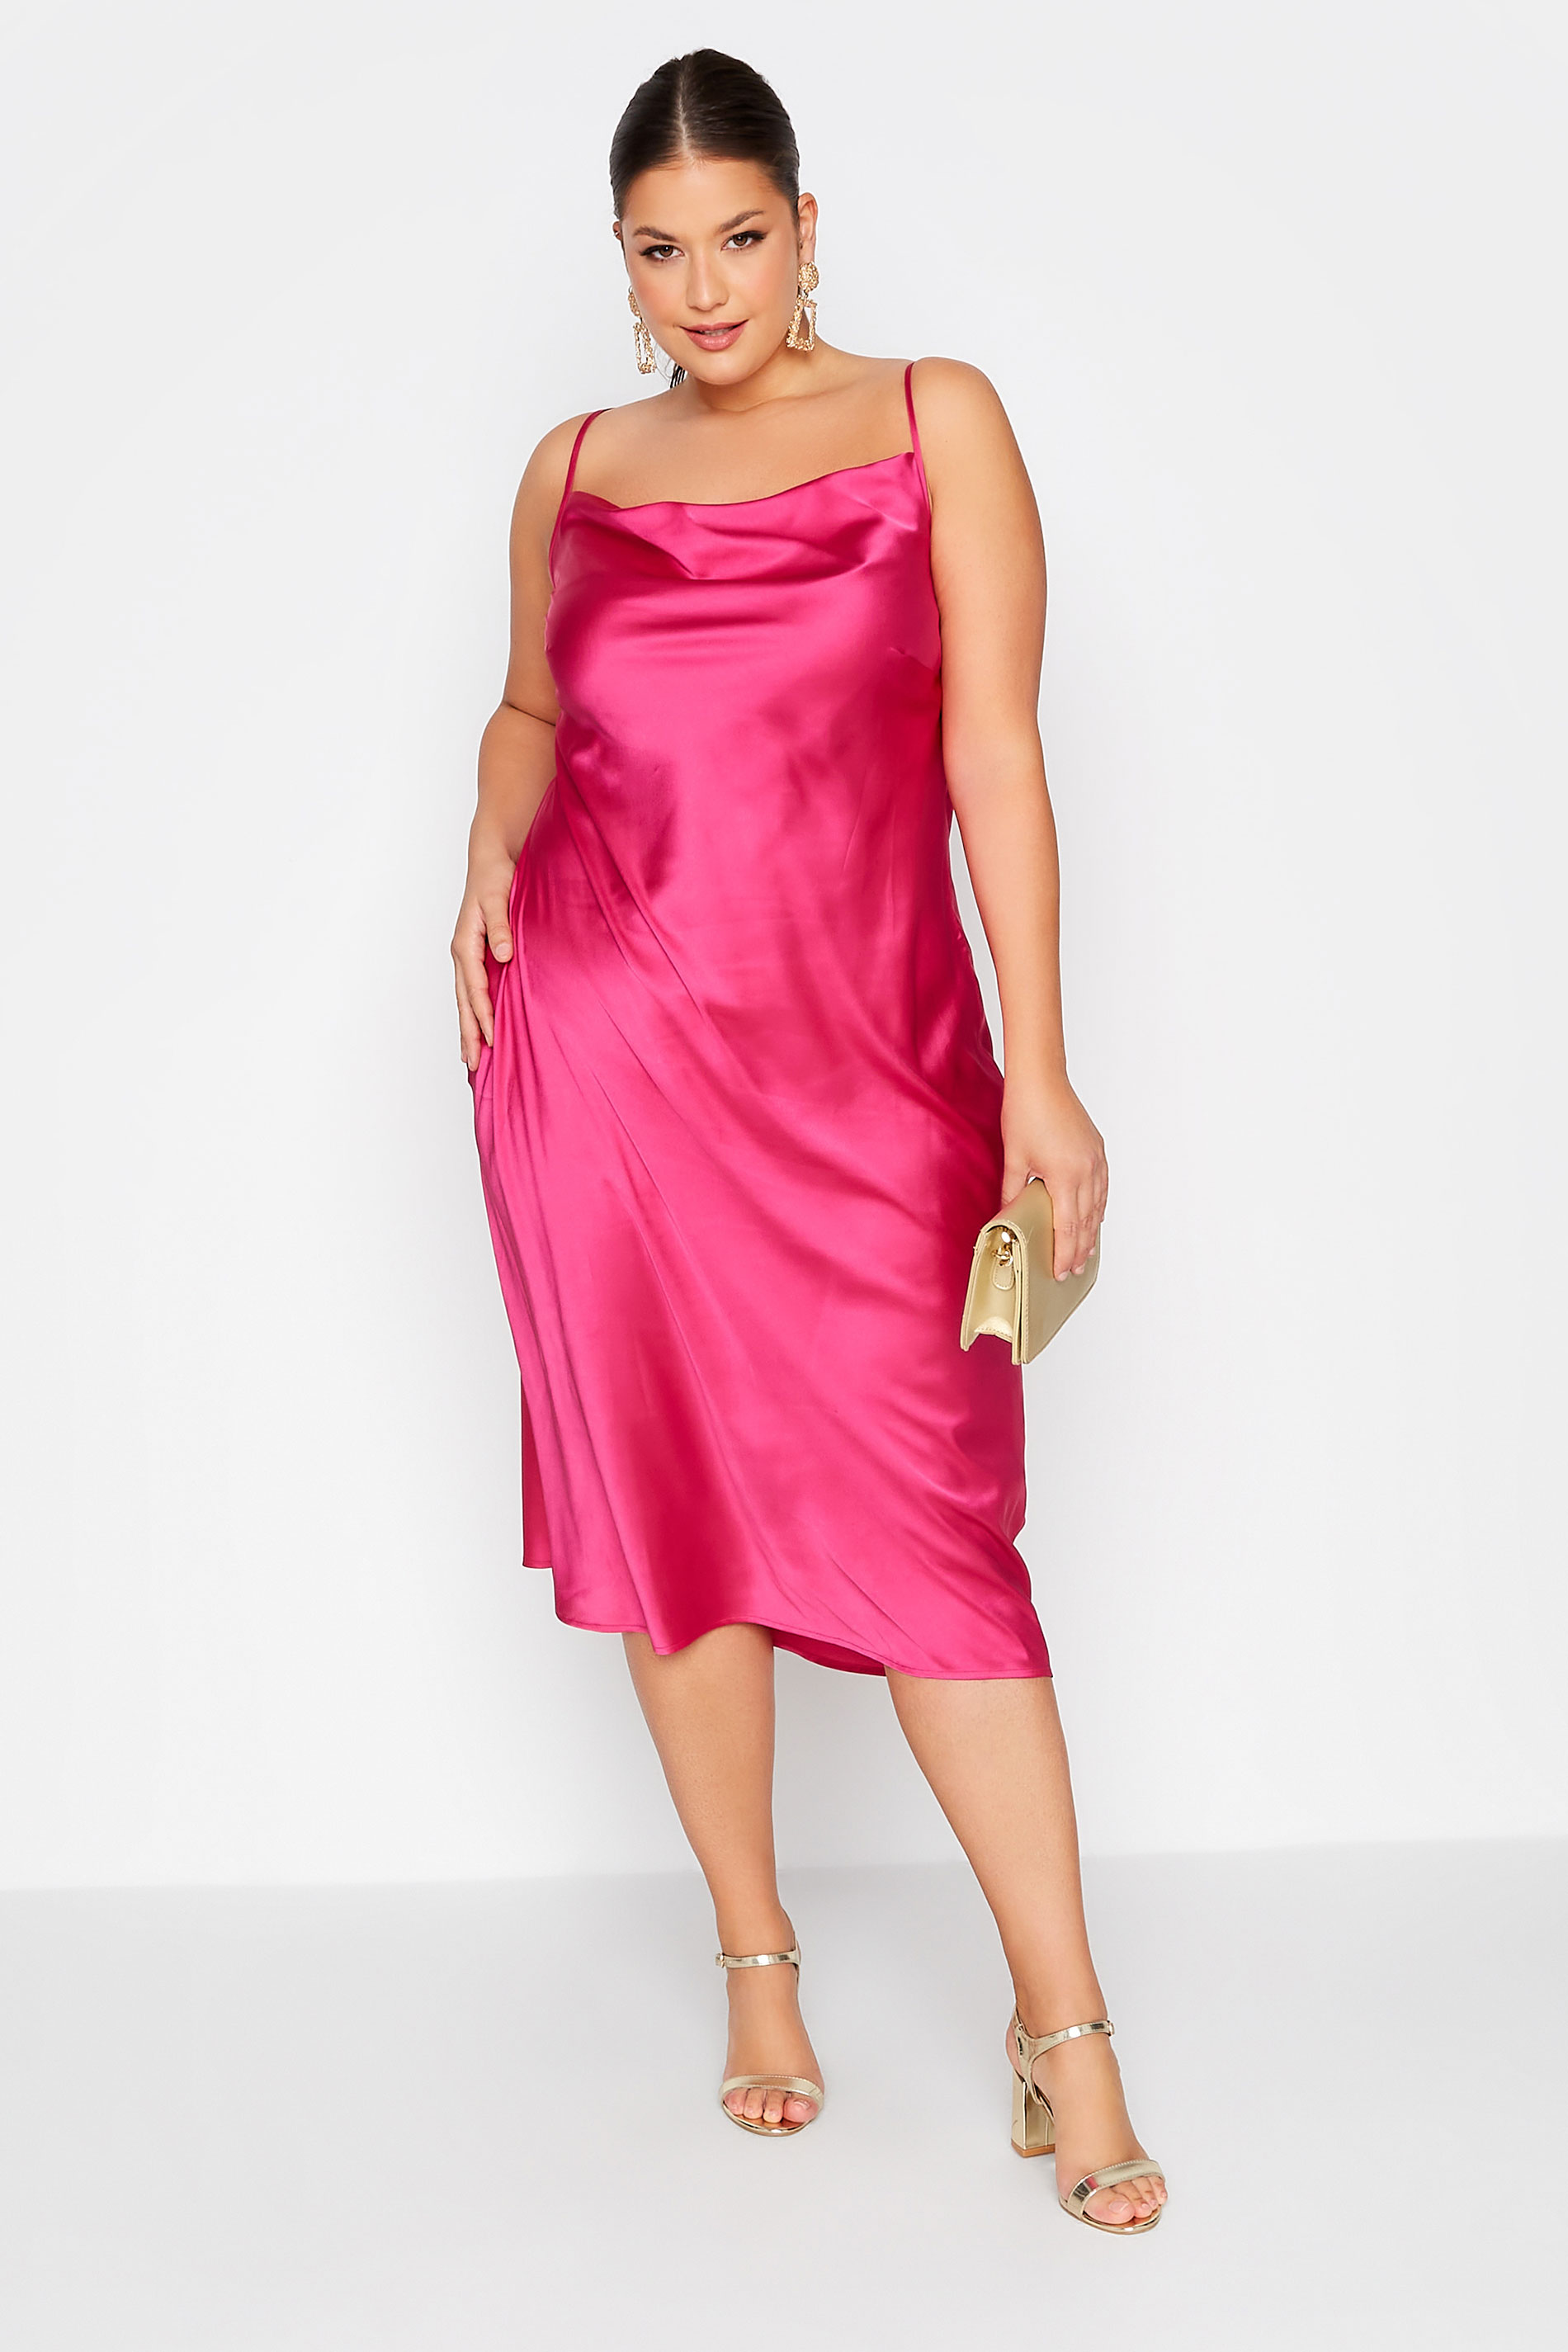 LIMITED COLLECTION Plus Size Pink Cowl Neck Dress | Yours Clothing  1